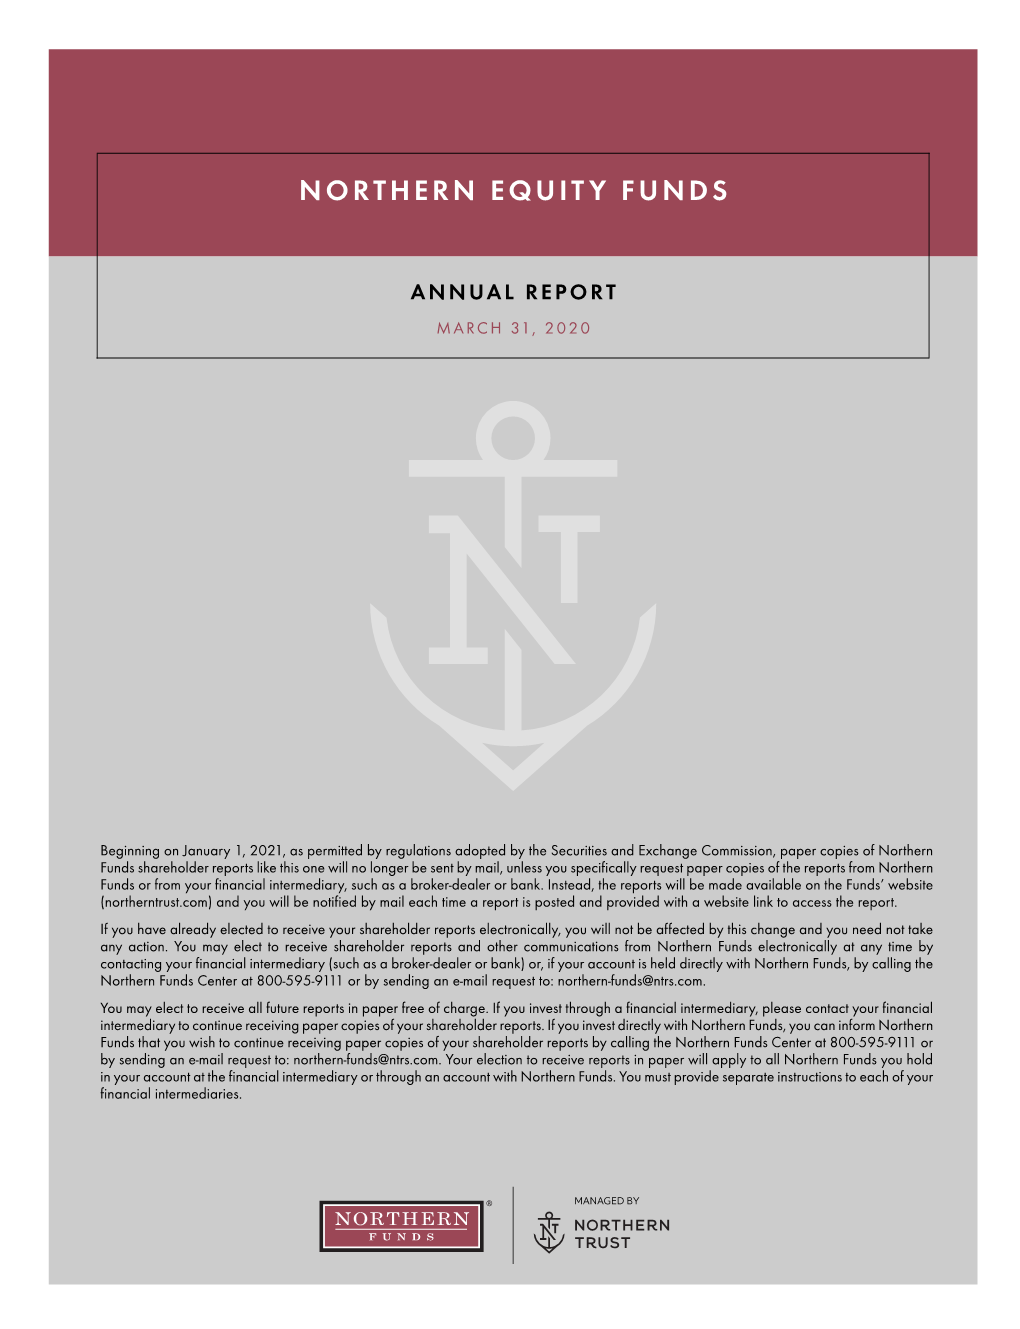 Northern Trust EQUITY FUNDS